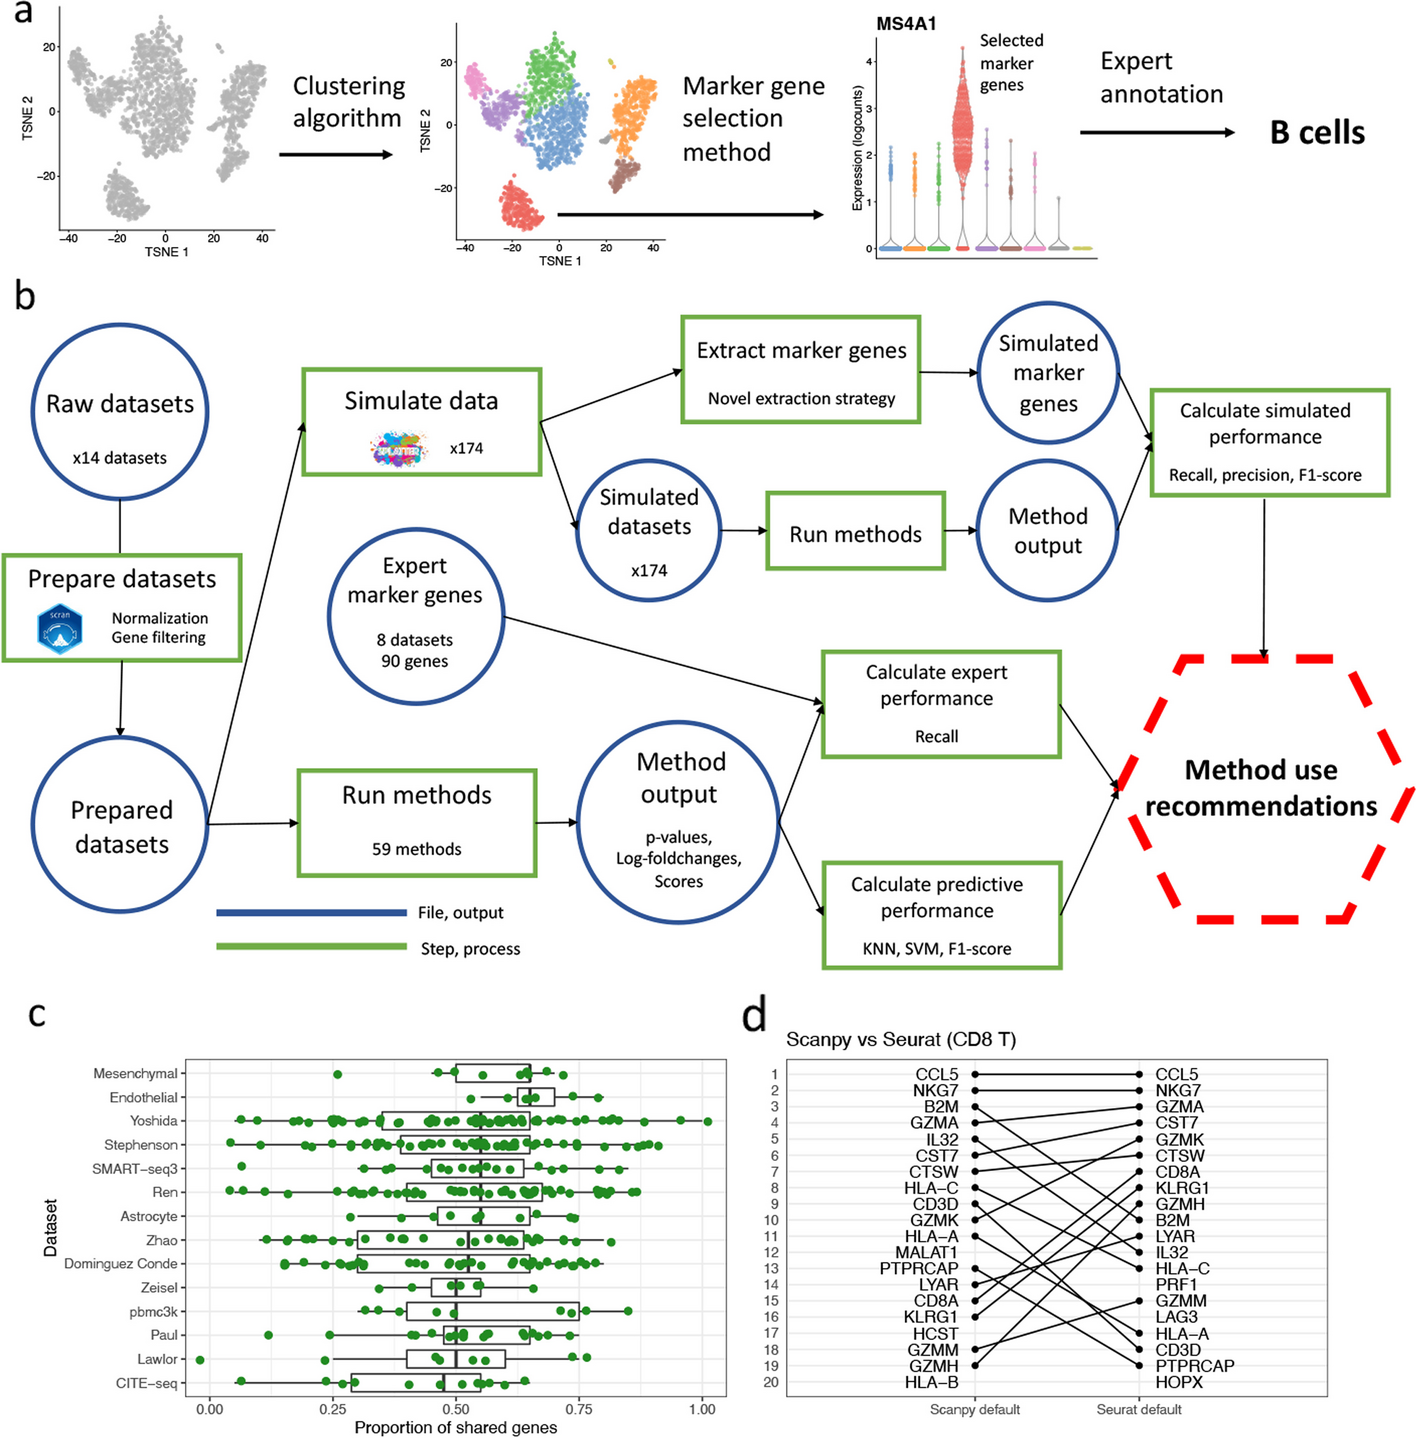 A comparison of marker gene selection methods for single-cell RNA sequencing data